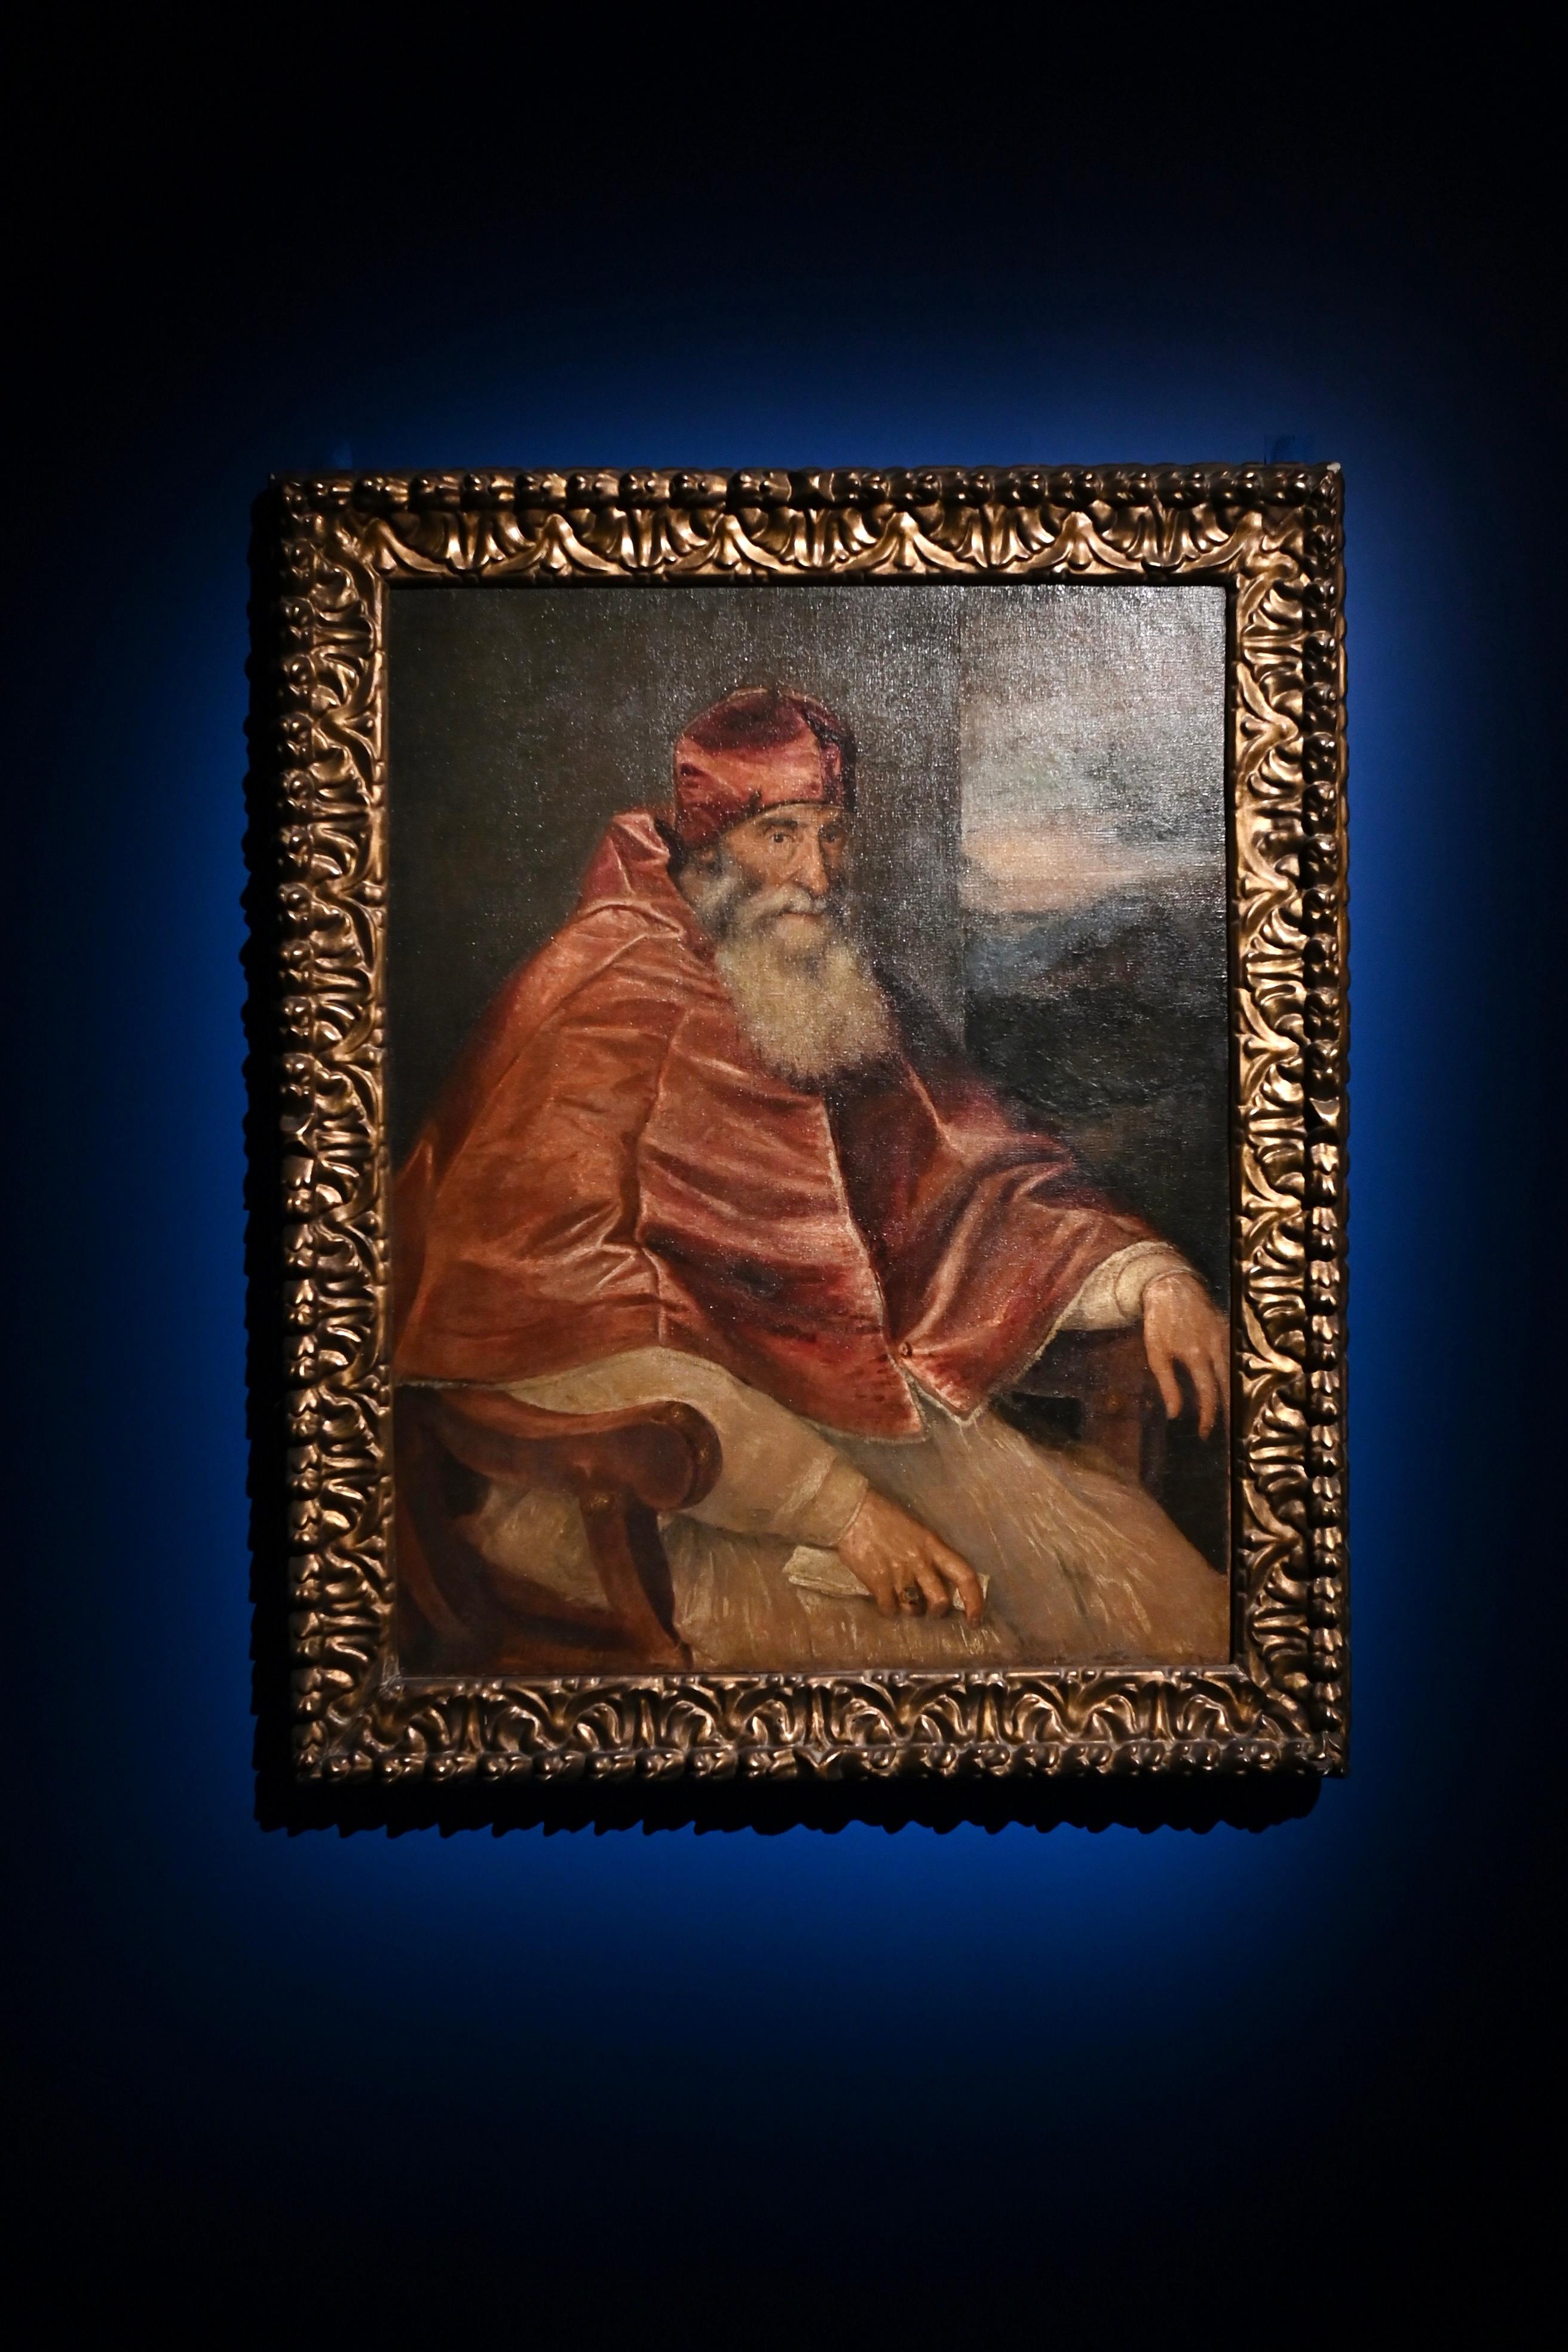 "The Hong Kong Jockey Club Series: The Road to the Baroque - Masterpieces from the Capodimonte Museum" exhibition will be held from tomorrow (July 15) at the Hong Kong Museum of Art. Picture shows the painting, "Portrait of Pope Paul III with the Camauro", by Titian.